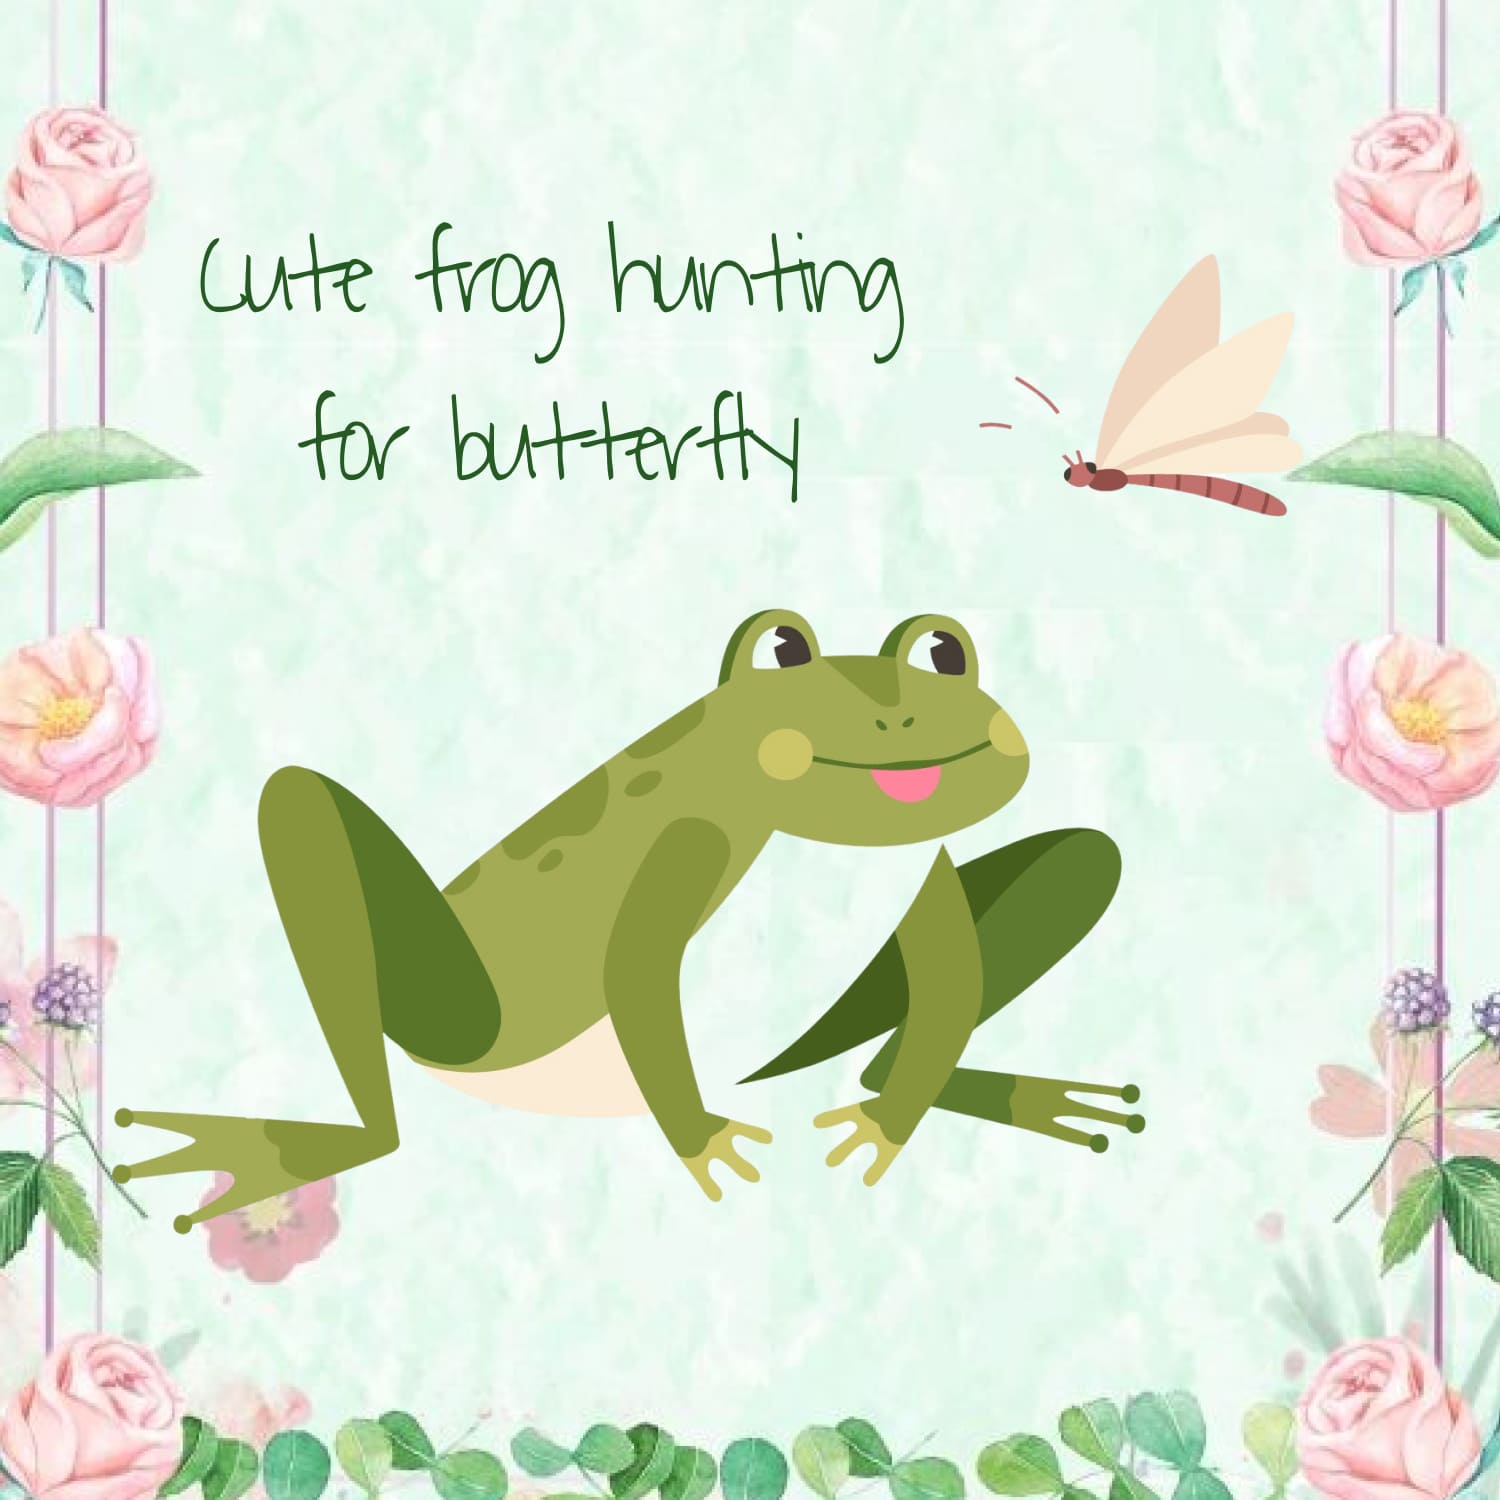 Set of 4 scenes with cute frog hunting for butterfly.